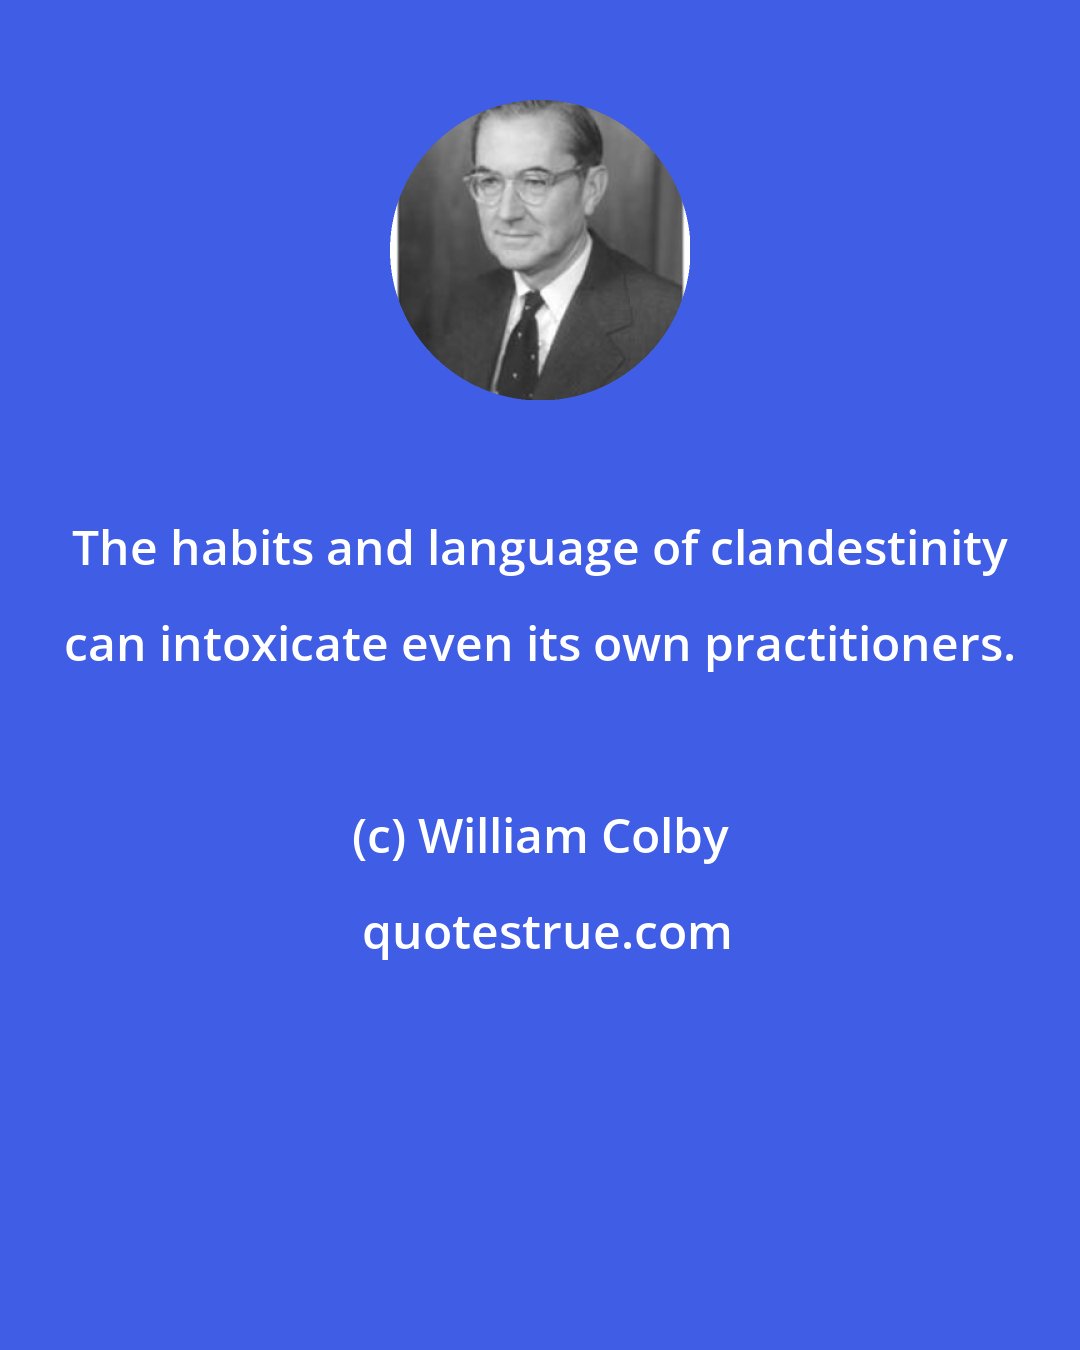 William Colby: The habits and language of clandestinity can intoxicate even its own practitioners.